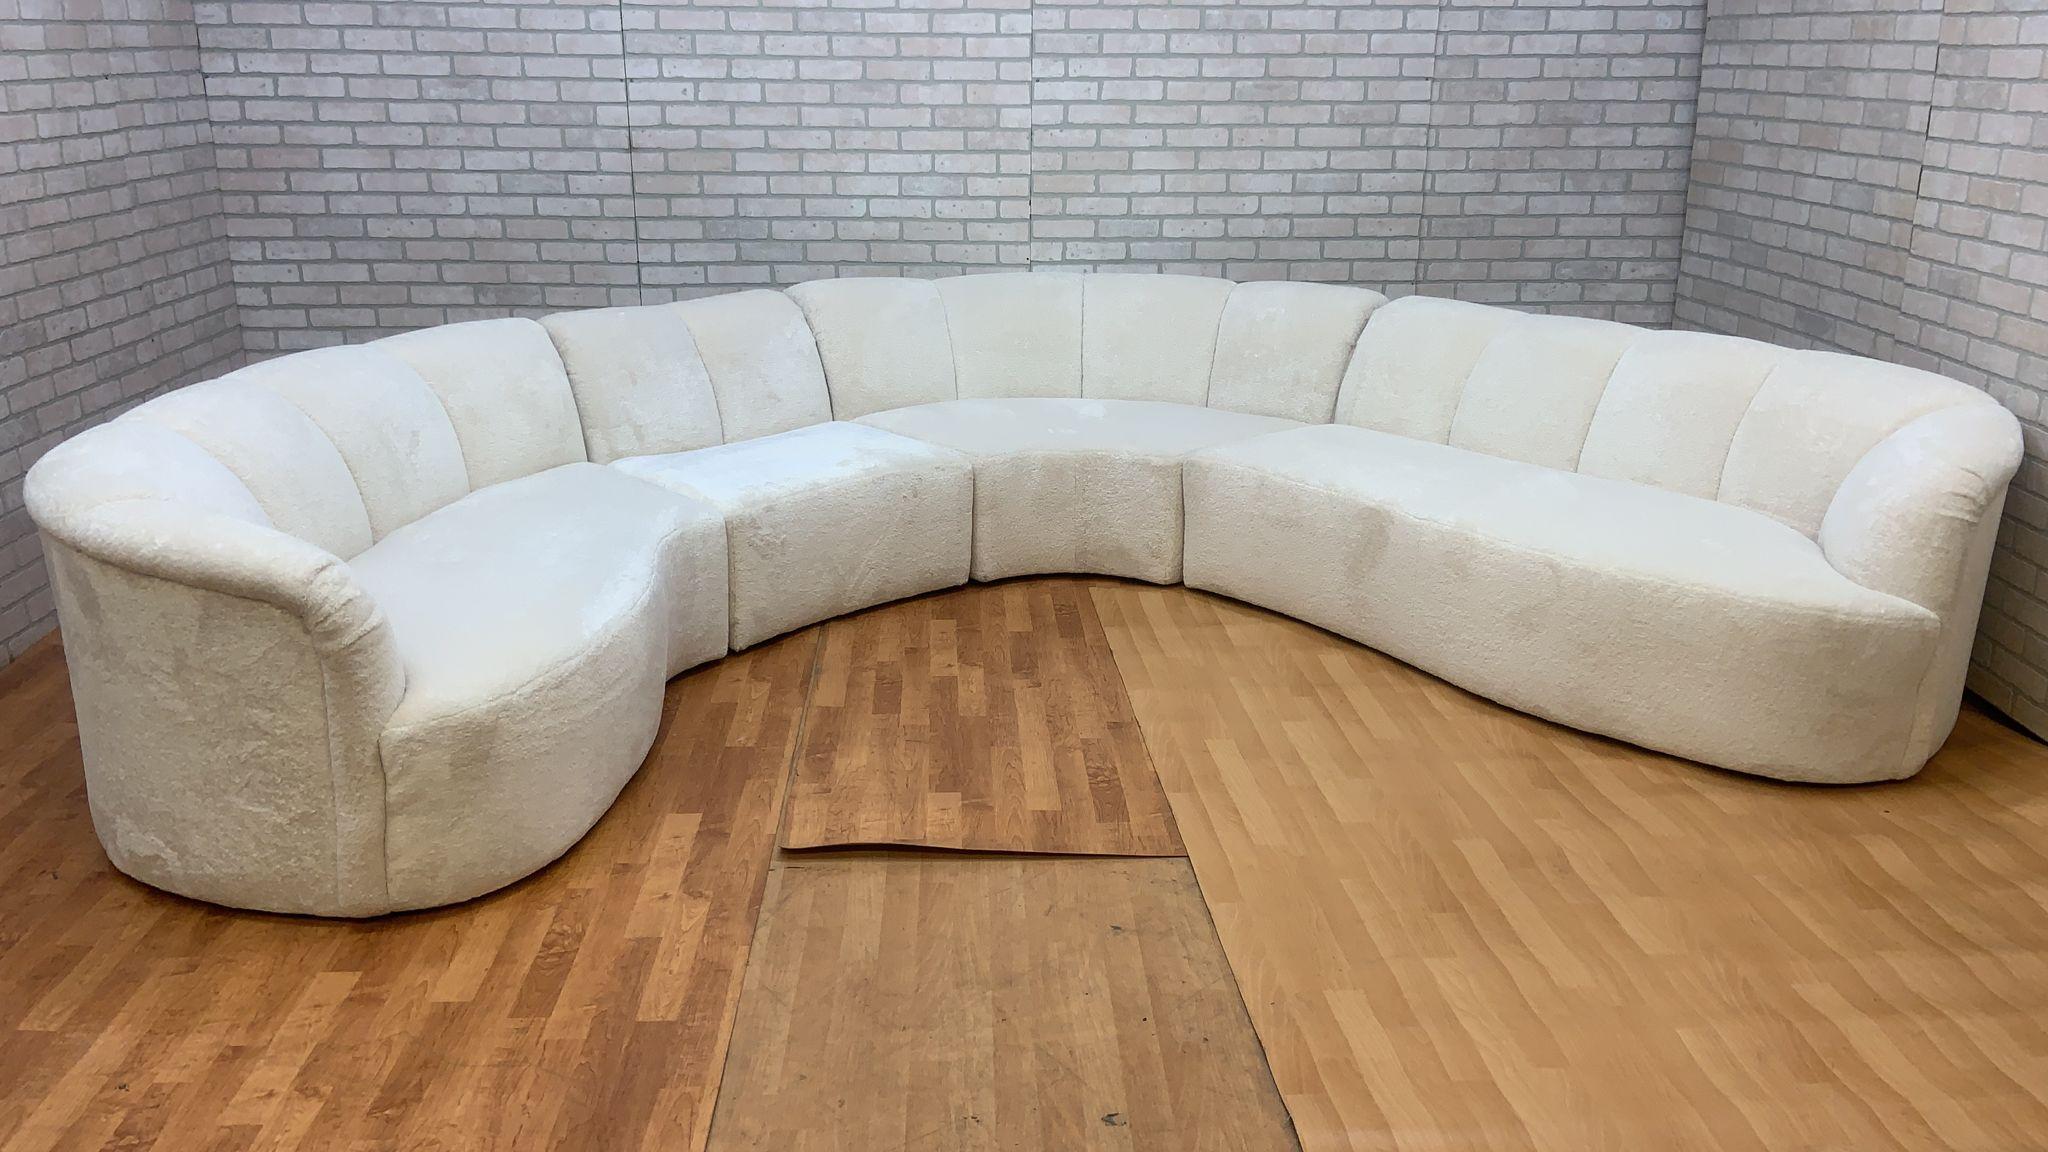 Curved Channel Back Serpentine Sectional Sofa Newly Upholstered in Alpaca Wool 8